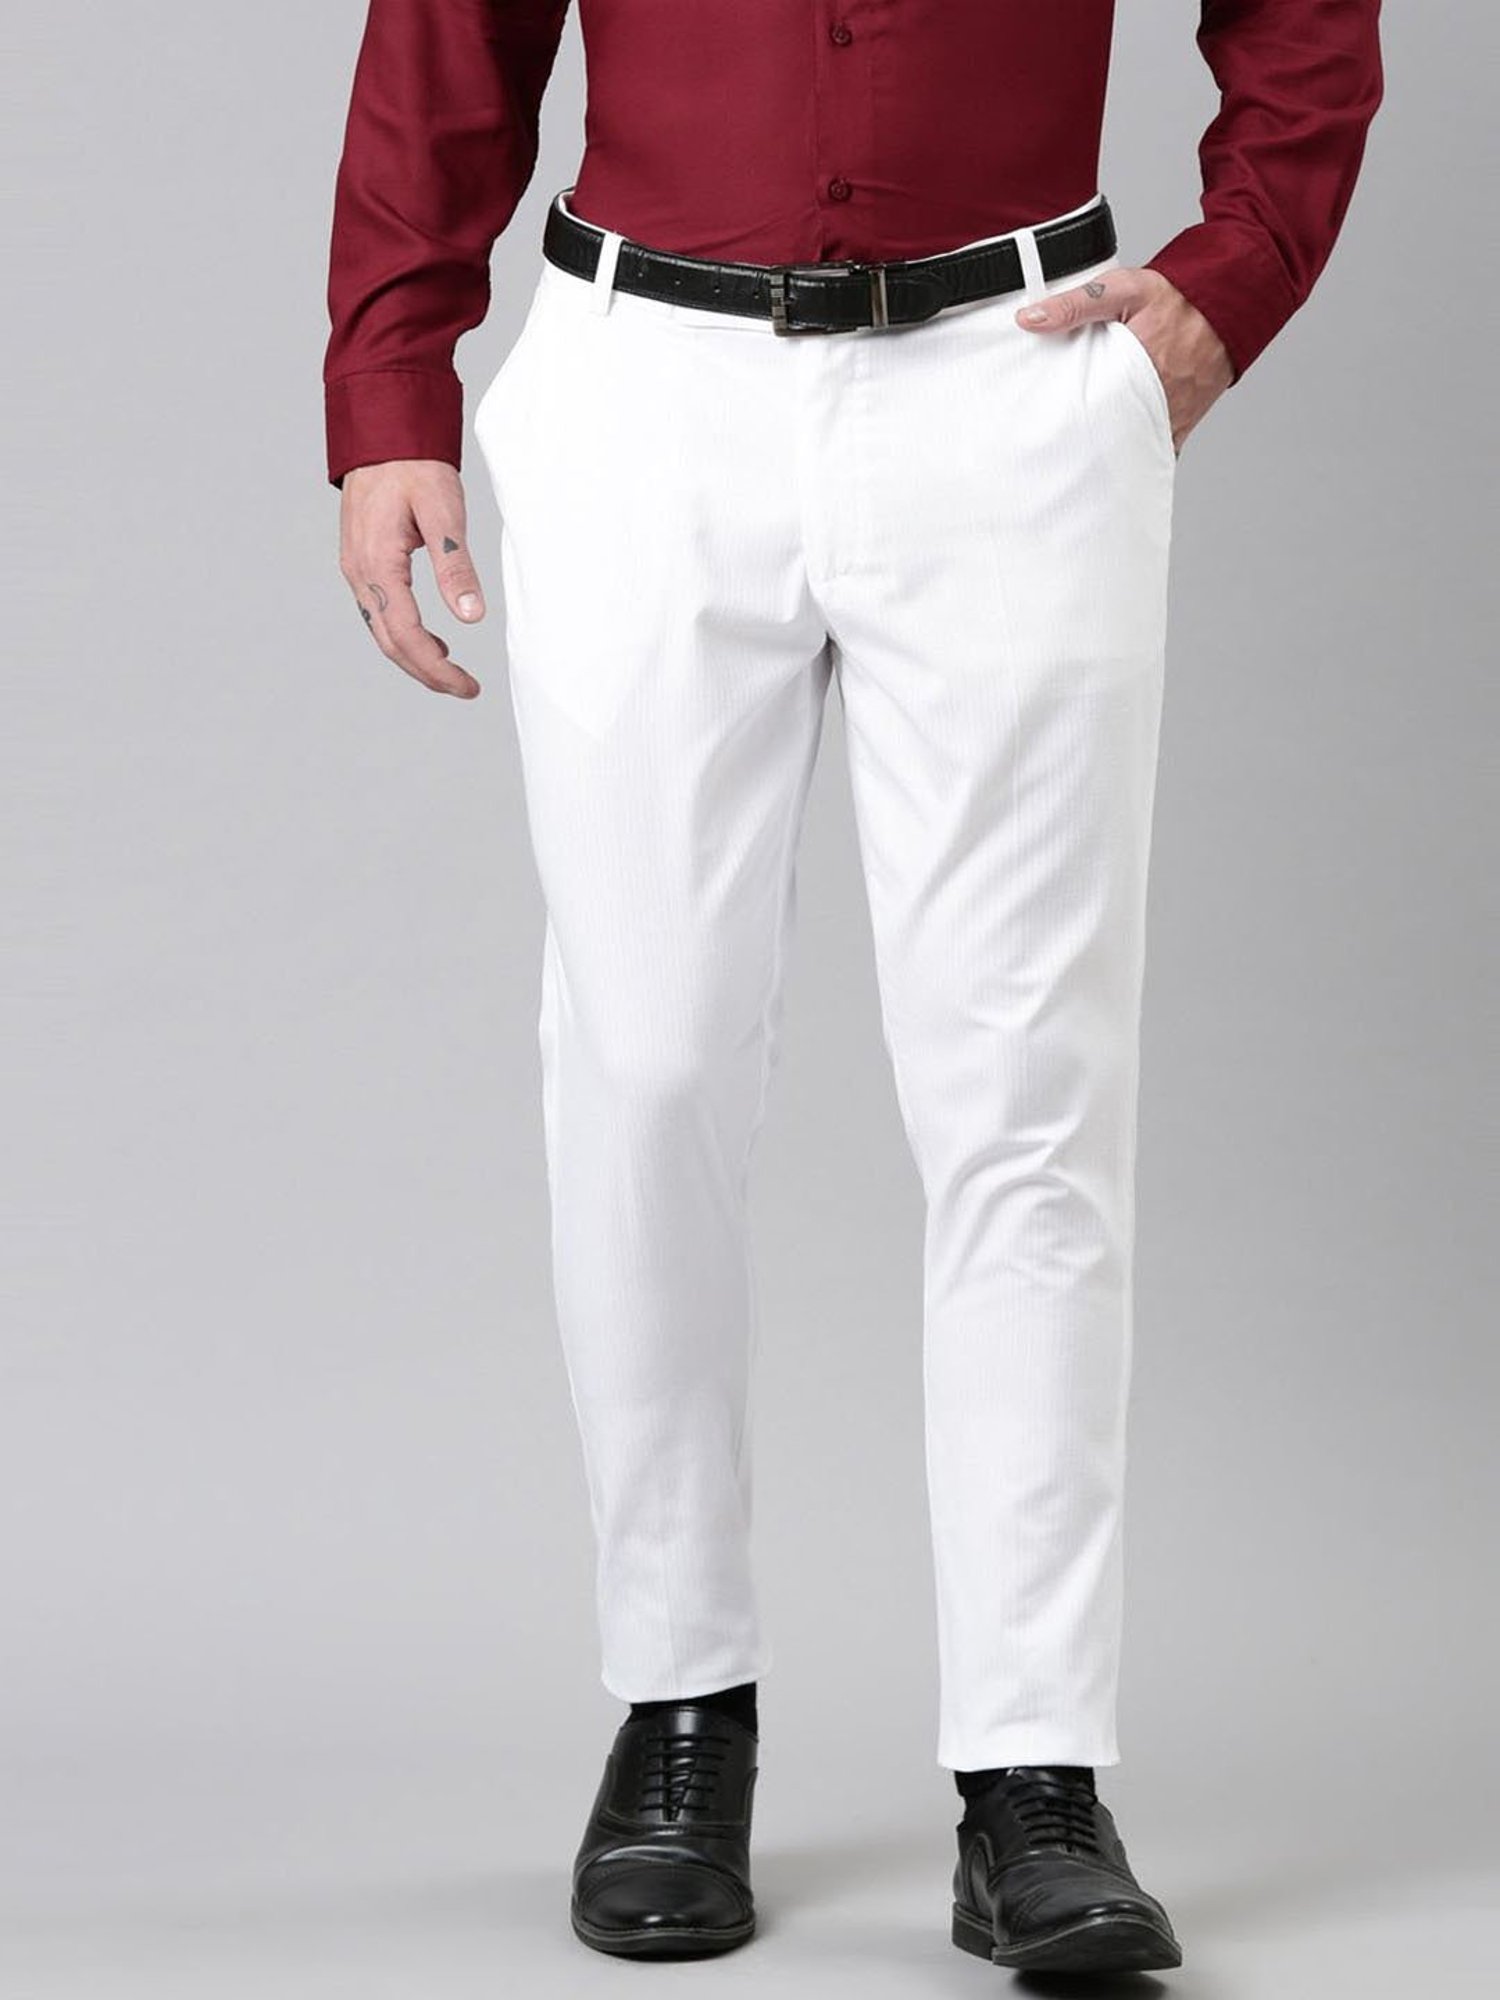 Buy Regular Trouser Pants White Beige and Sky Blue Combo of 3 Cotton for  Best Price, Reviews, Free Shipping